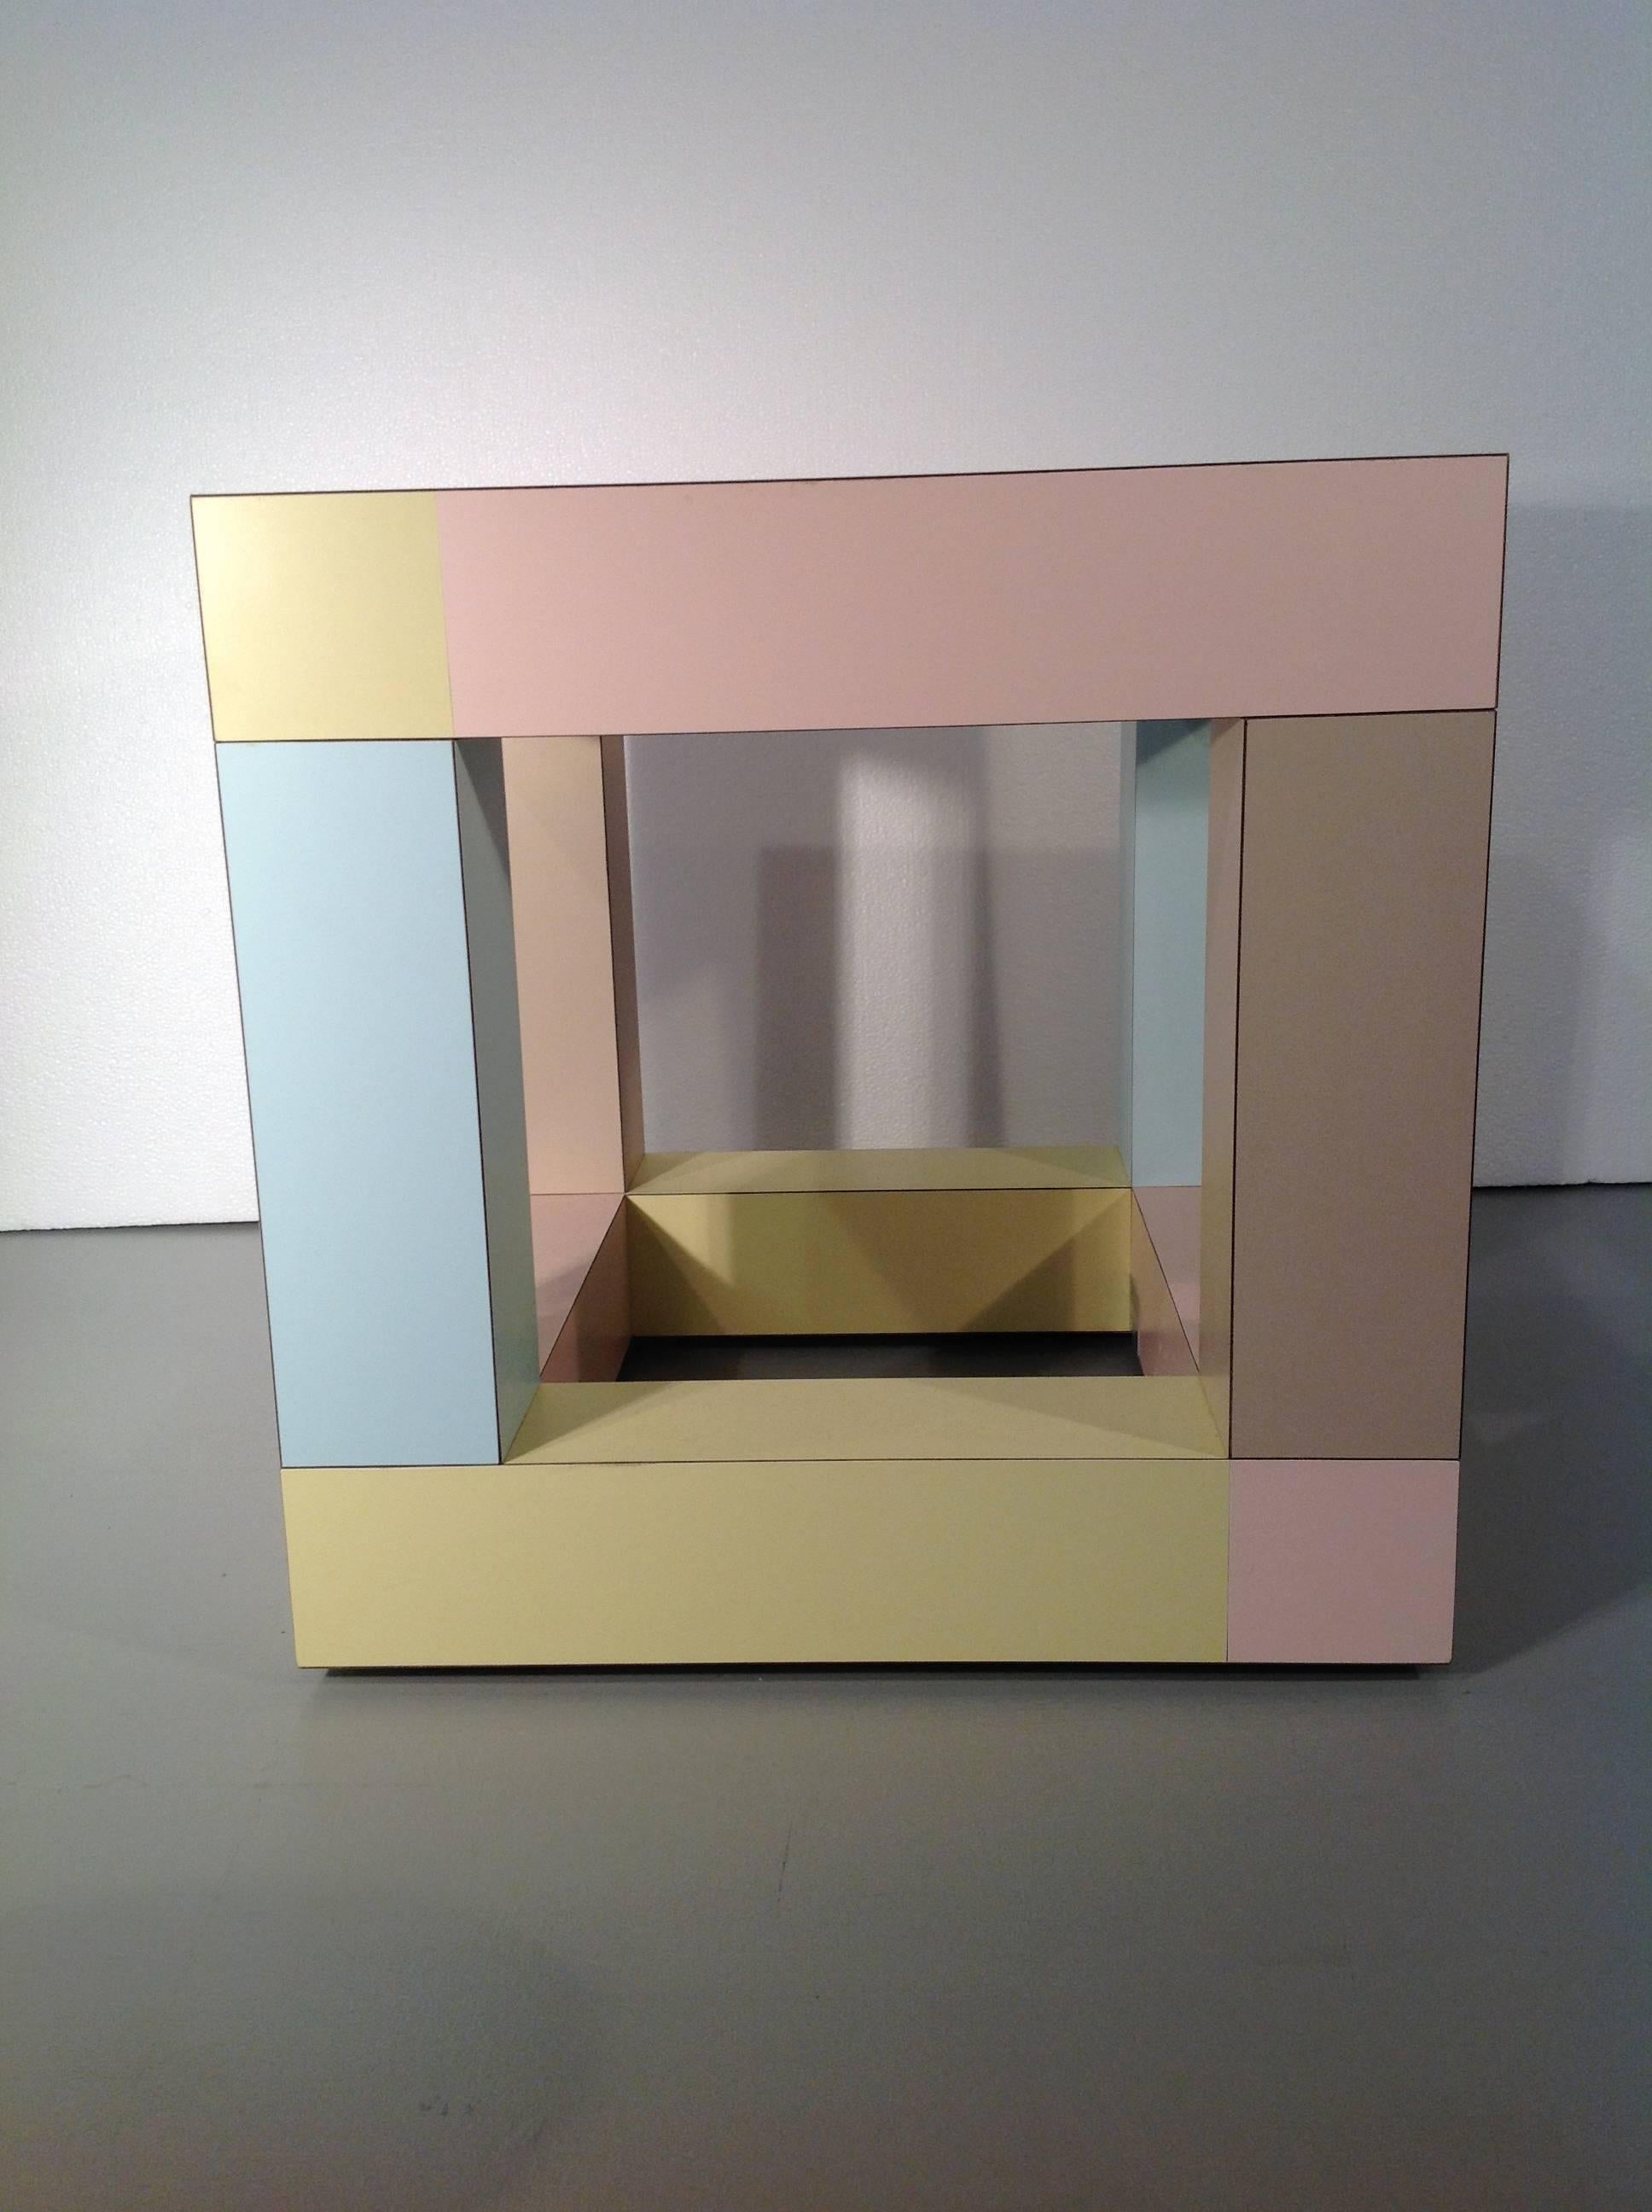 Mimosa end table by Ettore Sottsass for Memphis srl (1984)

A small end table in plastic laminates (different colors) with glass inset top / a perfect example of Sottsass's Masterly usage of color.